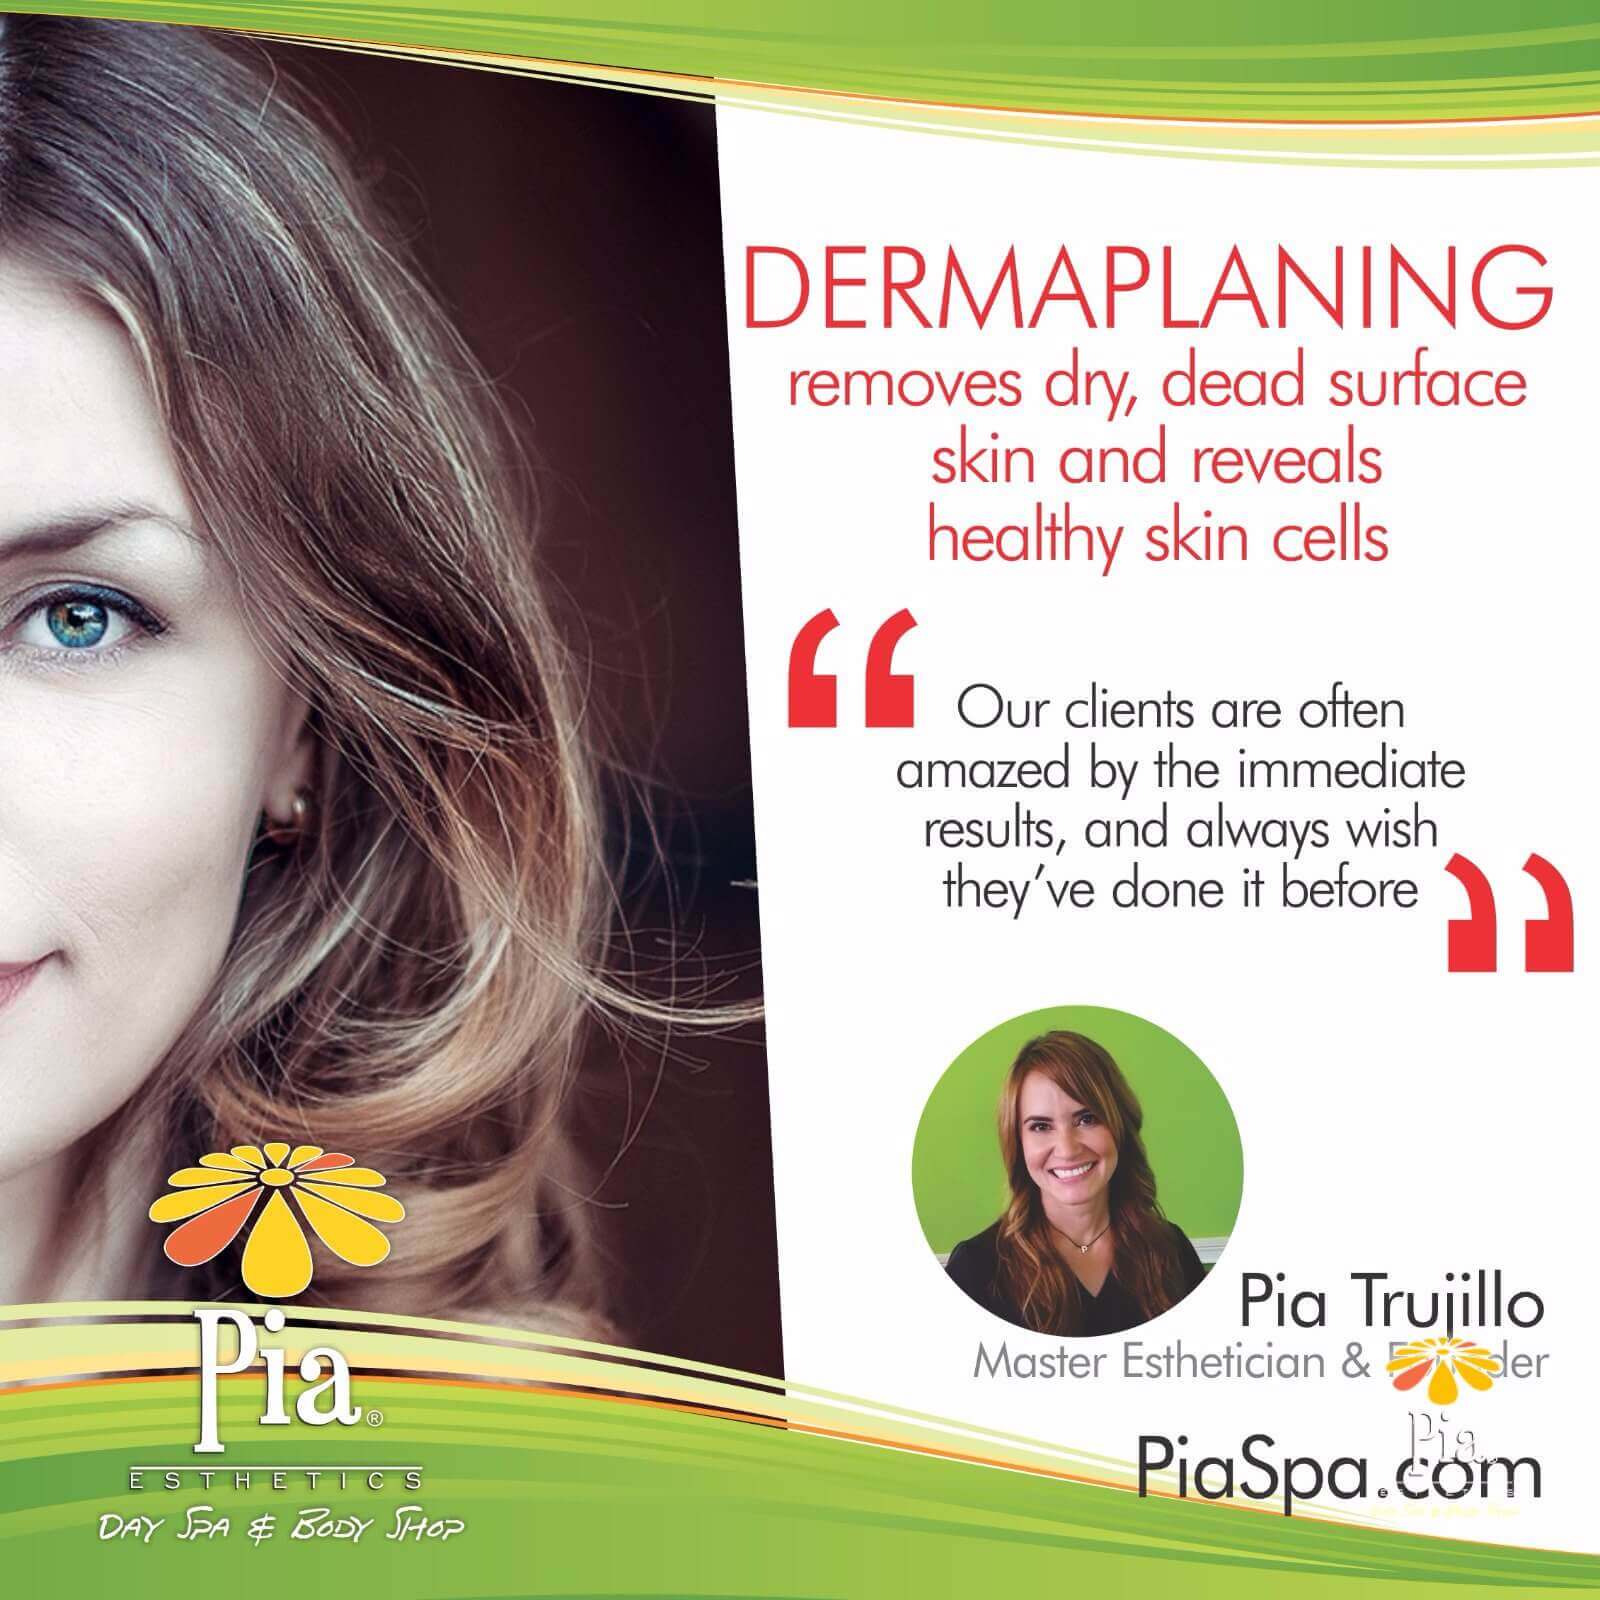 See Why Our Clients Love Dermaplaning!